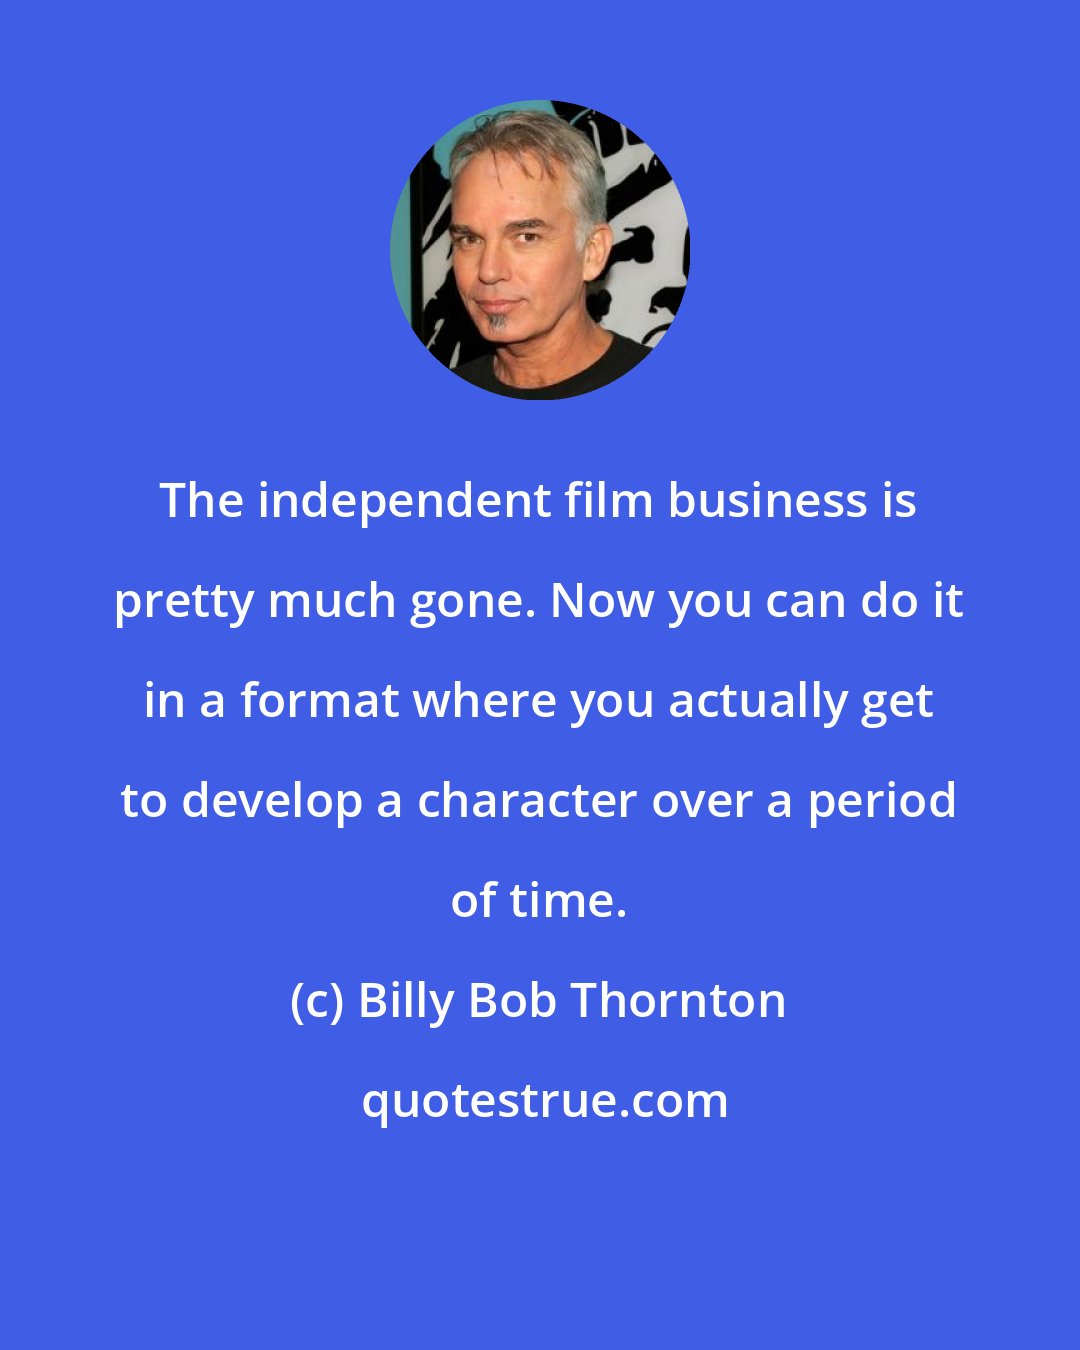 Billy Bob Thornton: The independent film business is pretty much gone. Now you can do it in a format where you actually get to develop a character over a period of time.